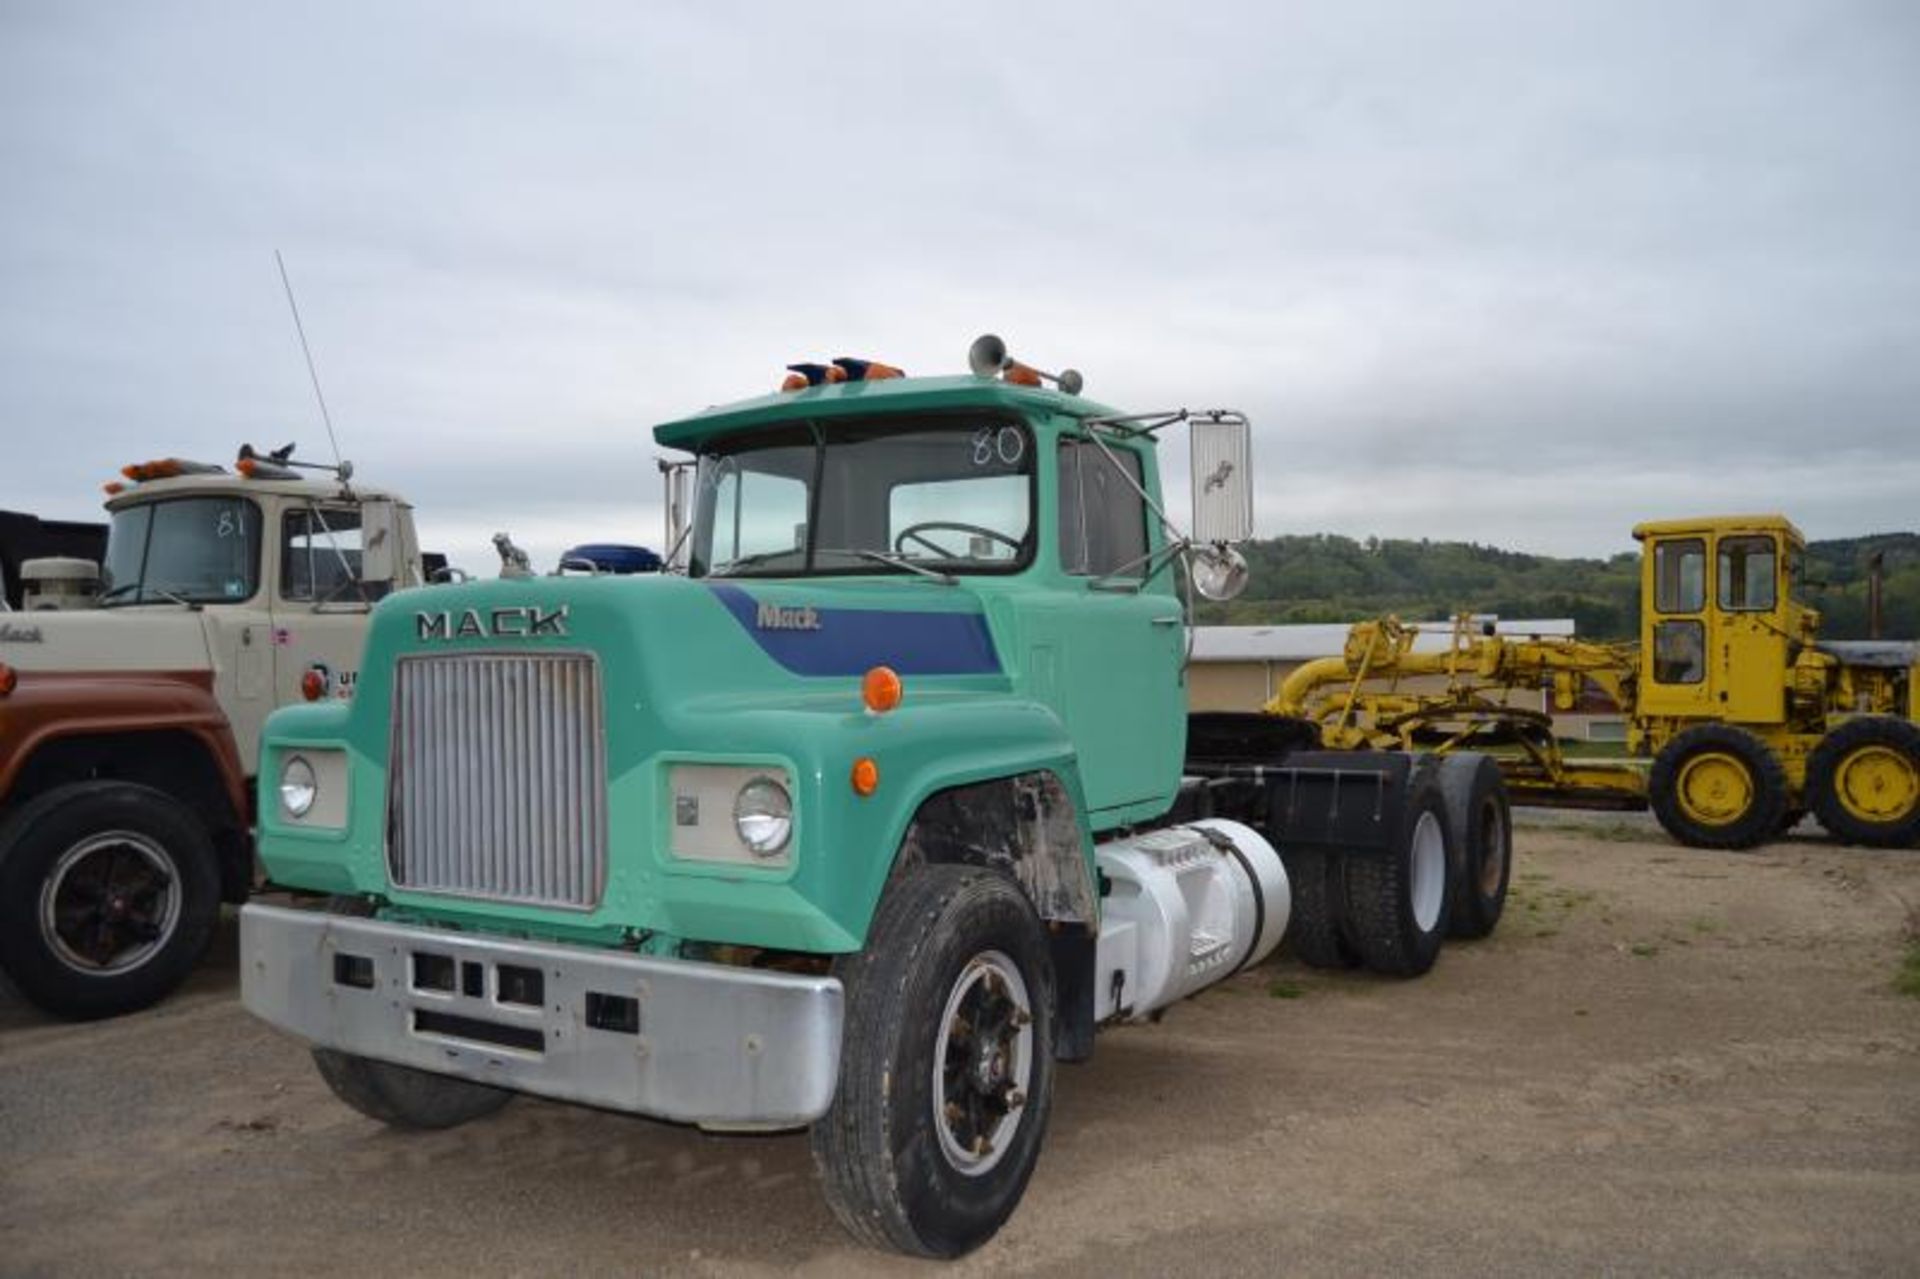 1980 MACK MODEL R686ST DAY CAB ROAD TRACTOR W/ 10 SPEED TRANSMISSION/MACK ENGINE; W/210,379 MILES - Image 3 of 3